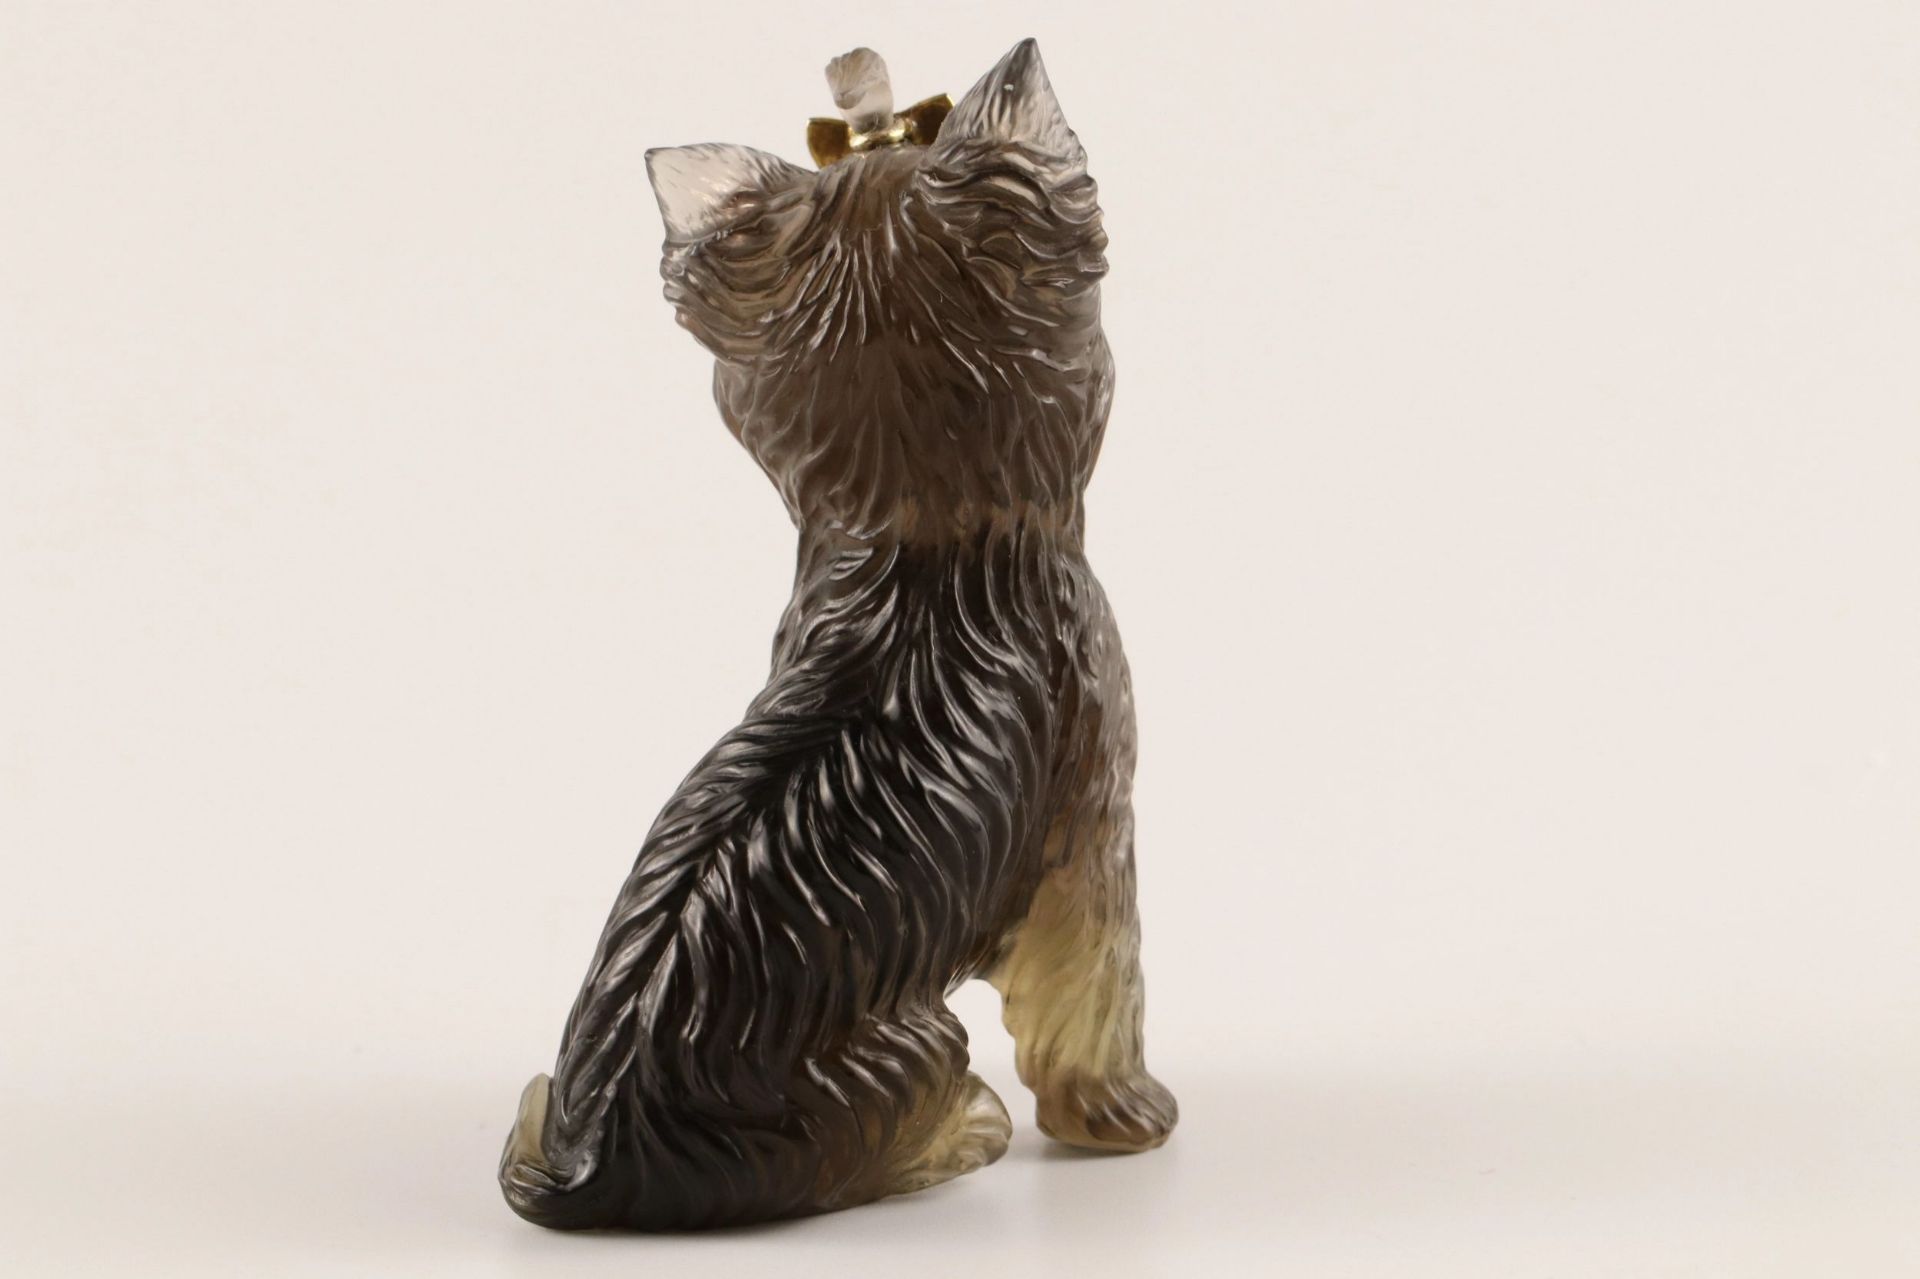 Stone-cut figurine Yorkshire Terrier in the style of Faberge 20th century. - Image 4 of 5